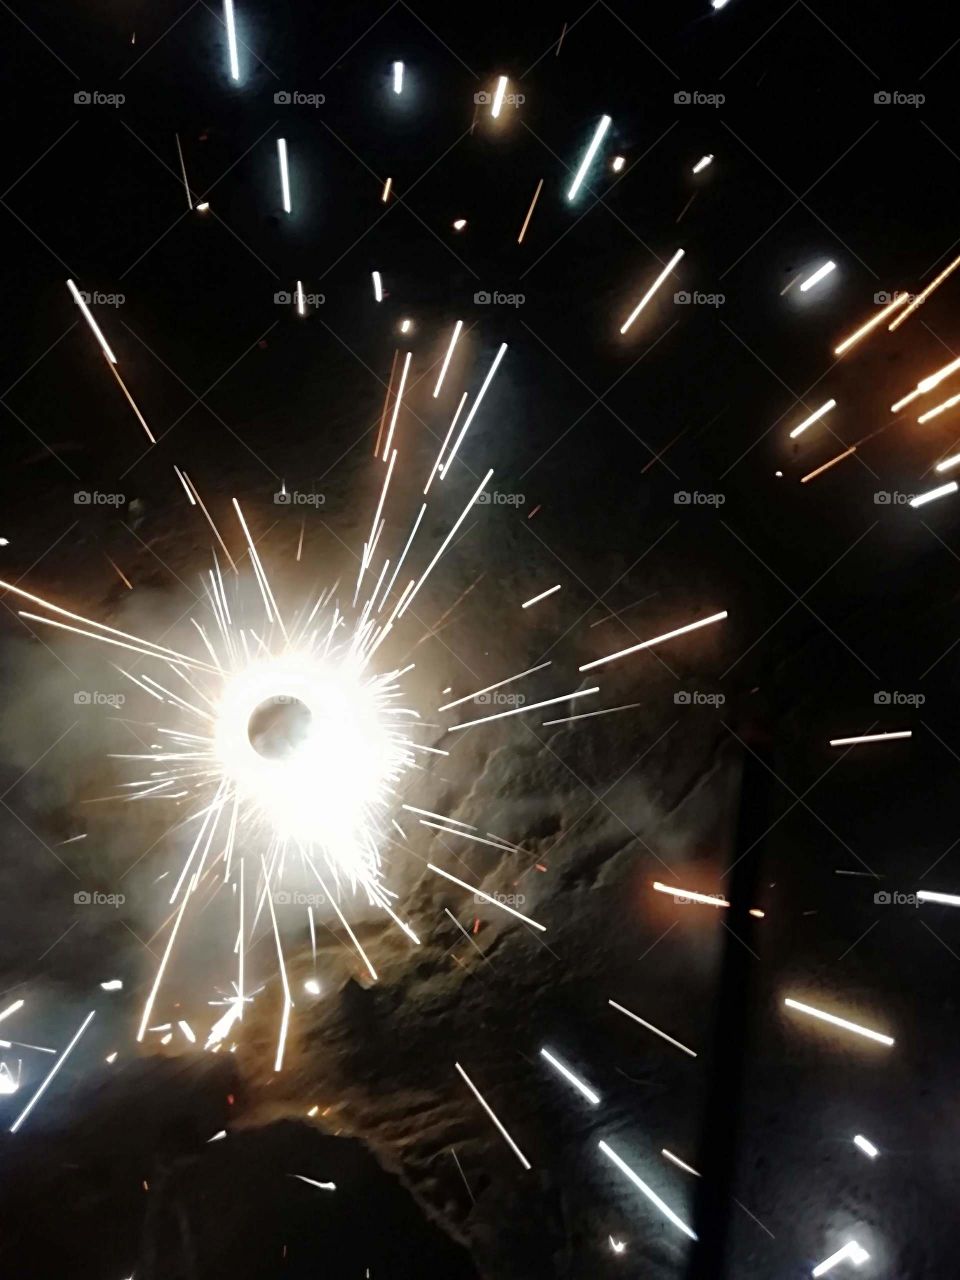 Fire works on Diwali Celebrations in South India